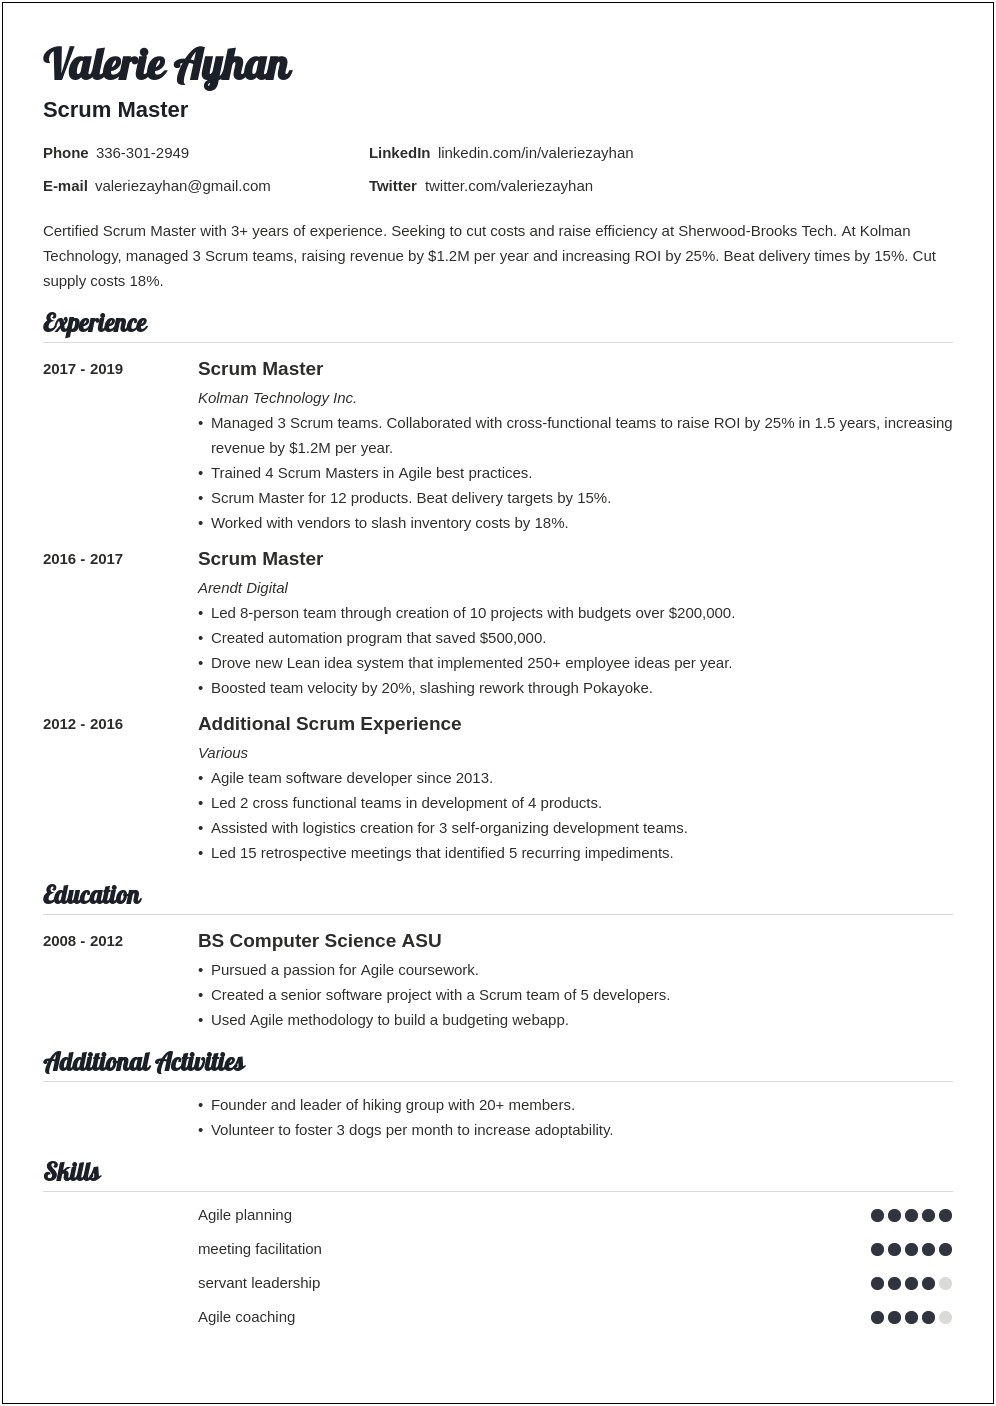 Sample Resume With Agile Experience For Testing